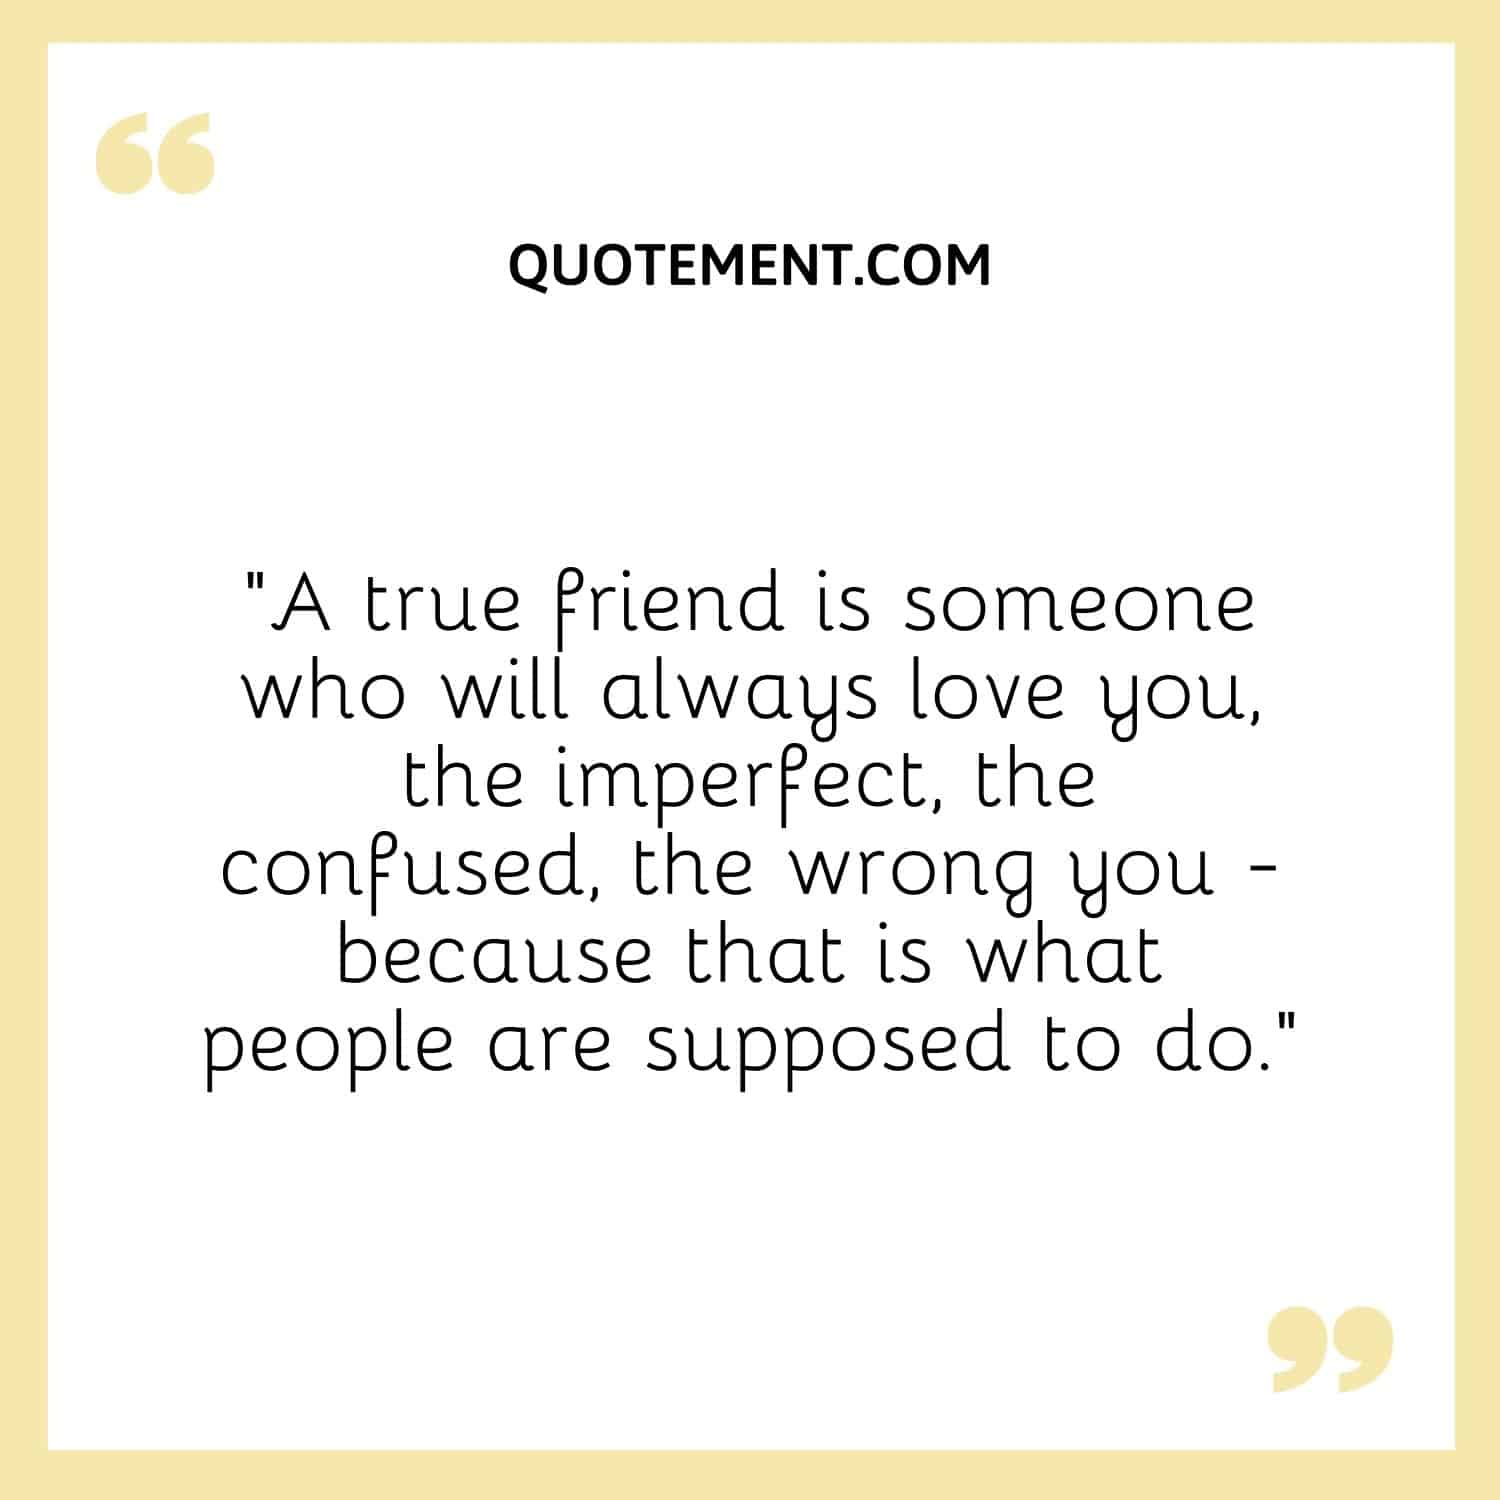 A true friend is someone who will always love you